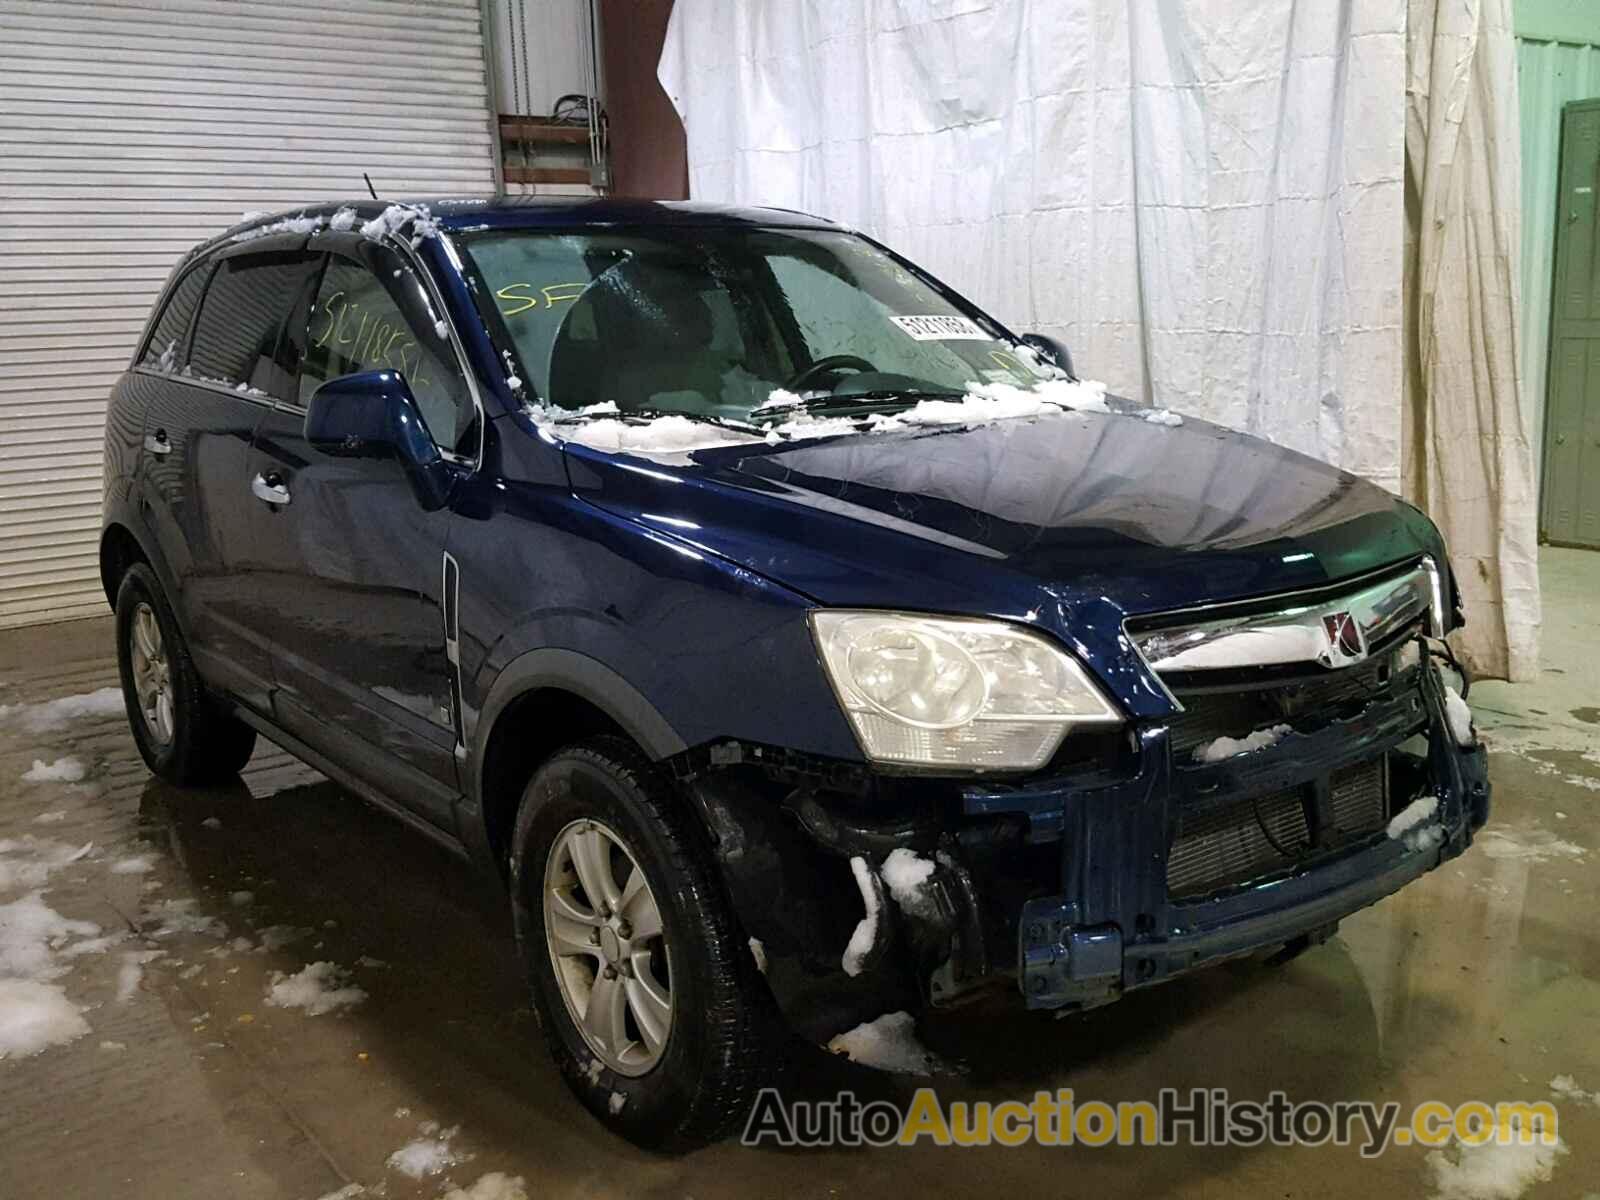 2008 SATURN VUE XE, 3GSCL33P28S660810